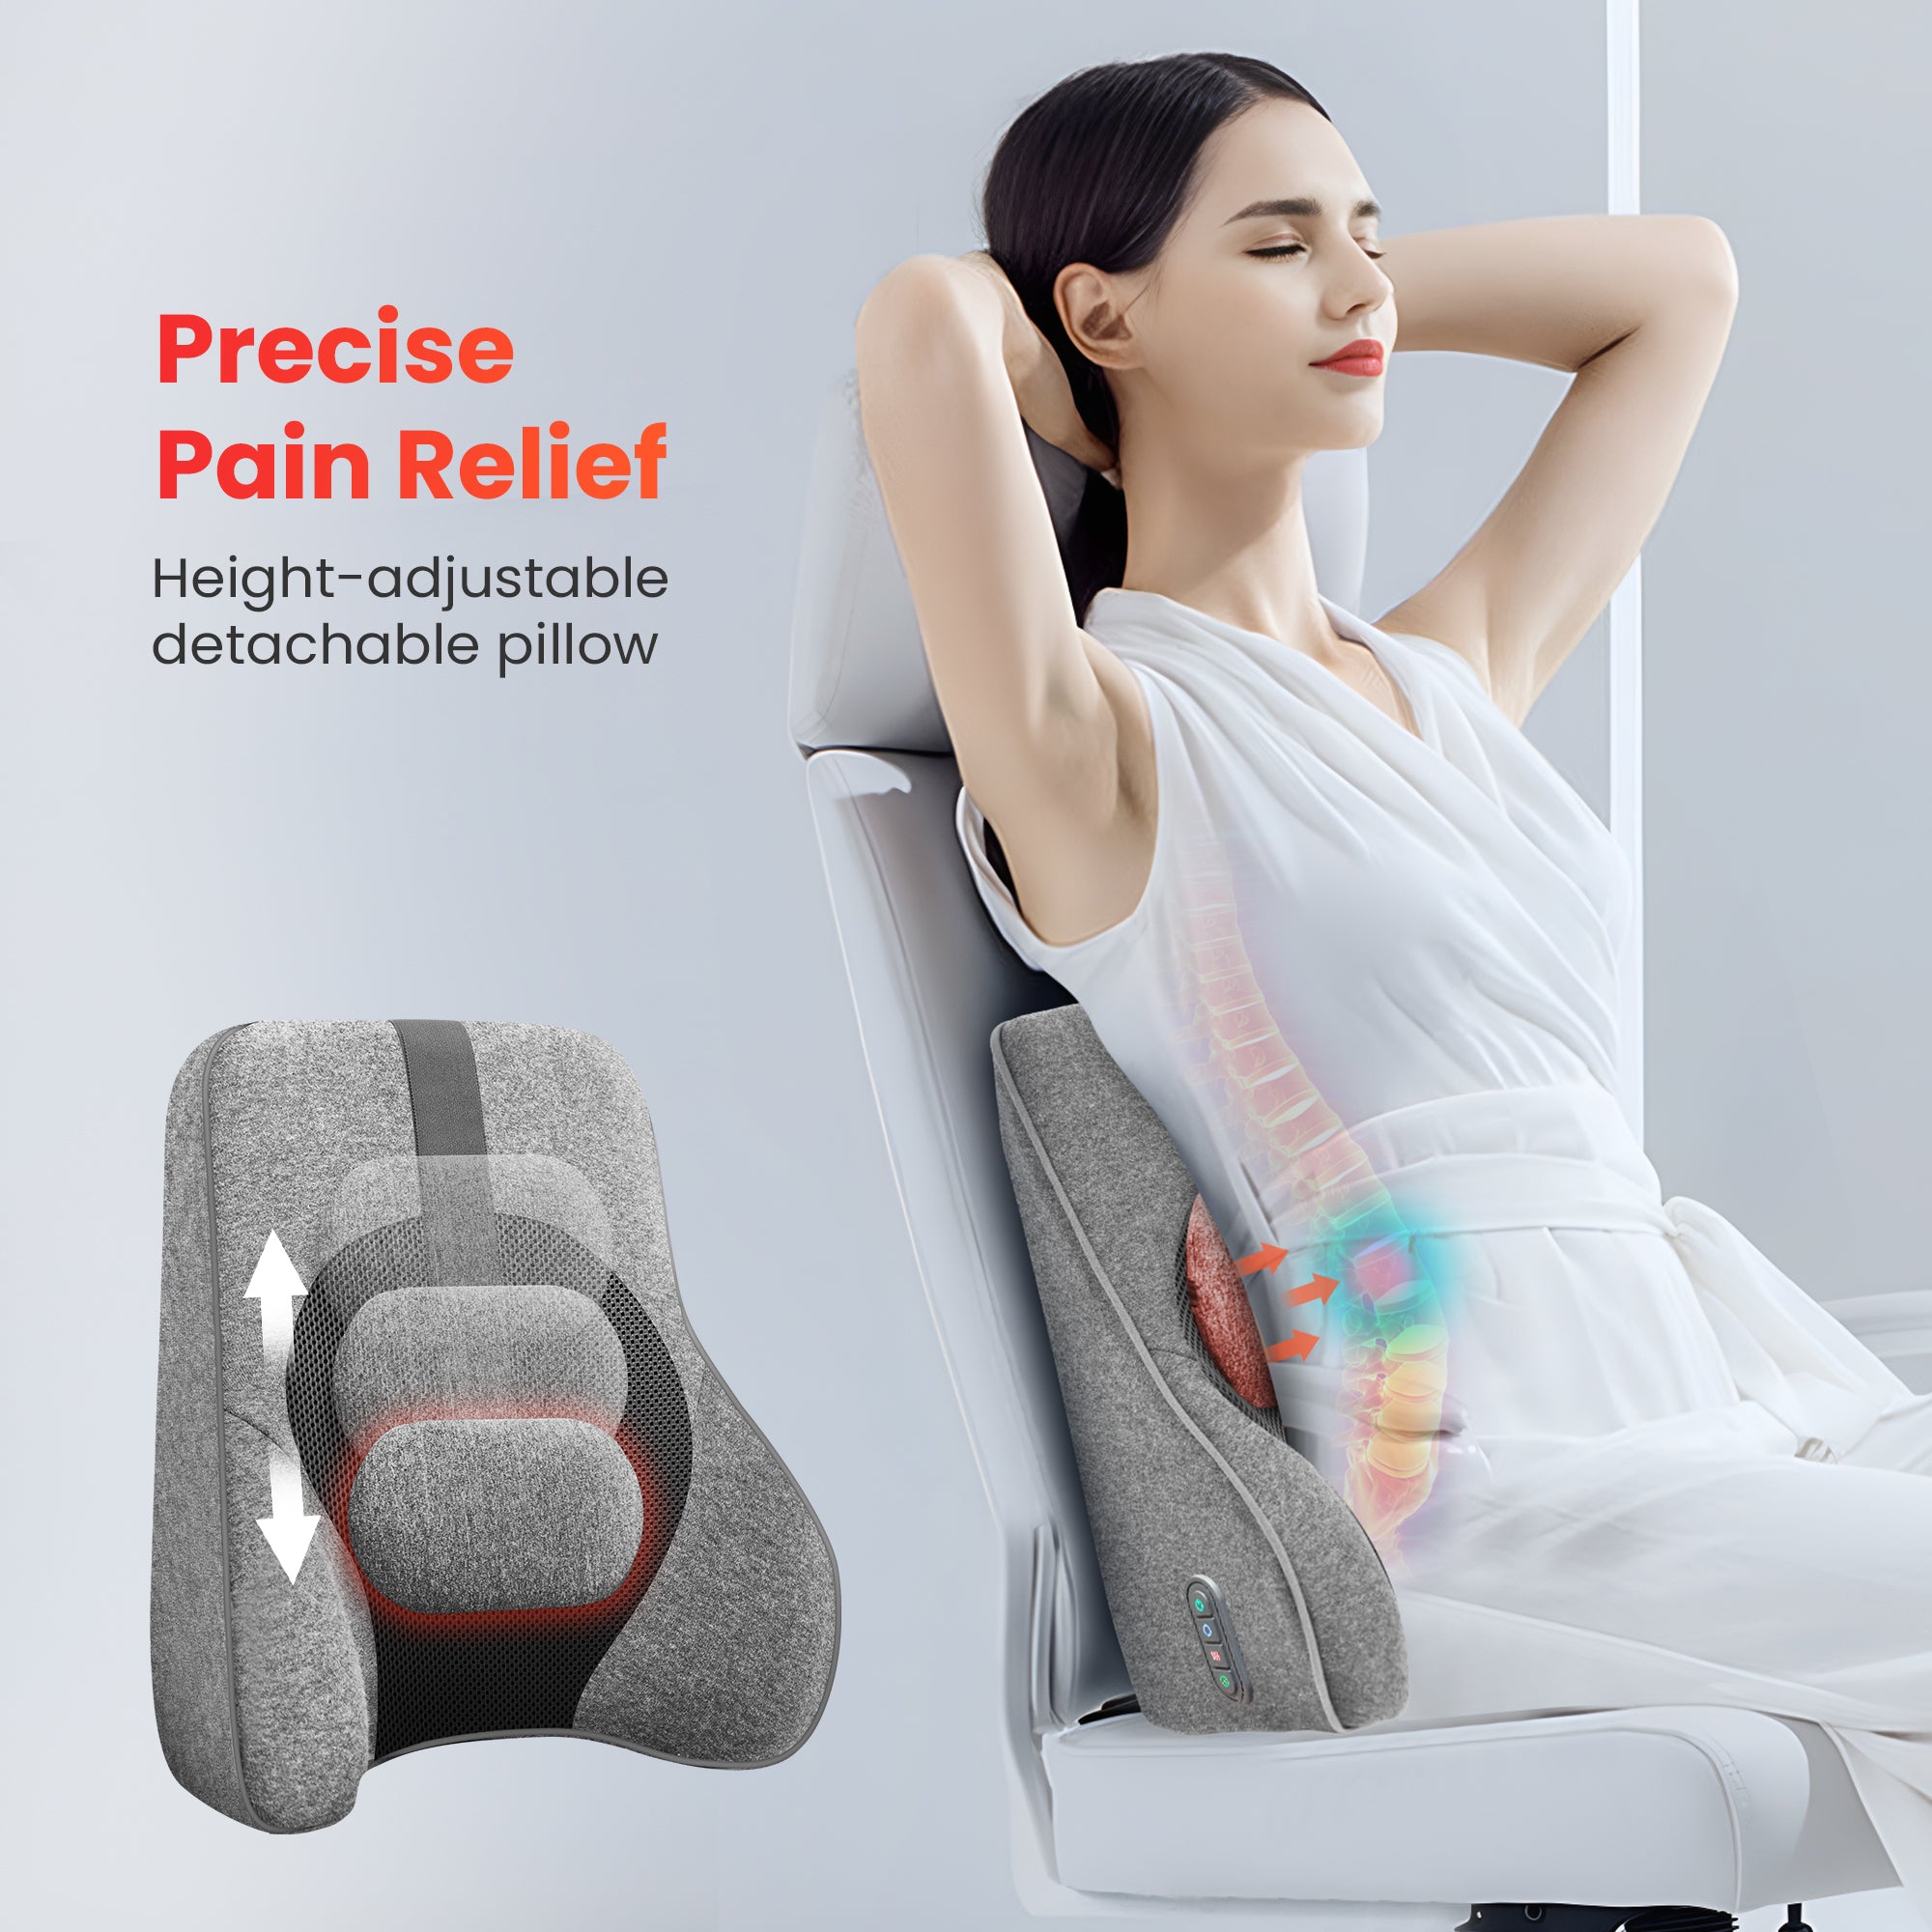 Back Lumbar Support Pillow for Office Chair Car Gaming Chair CF-1503S